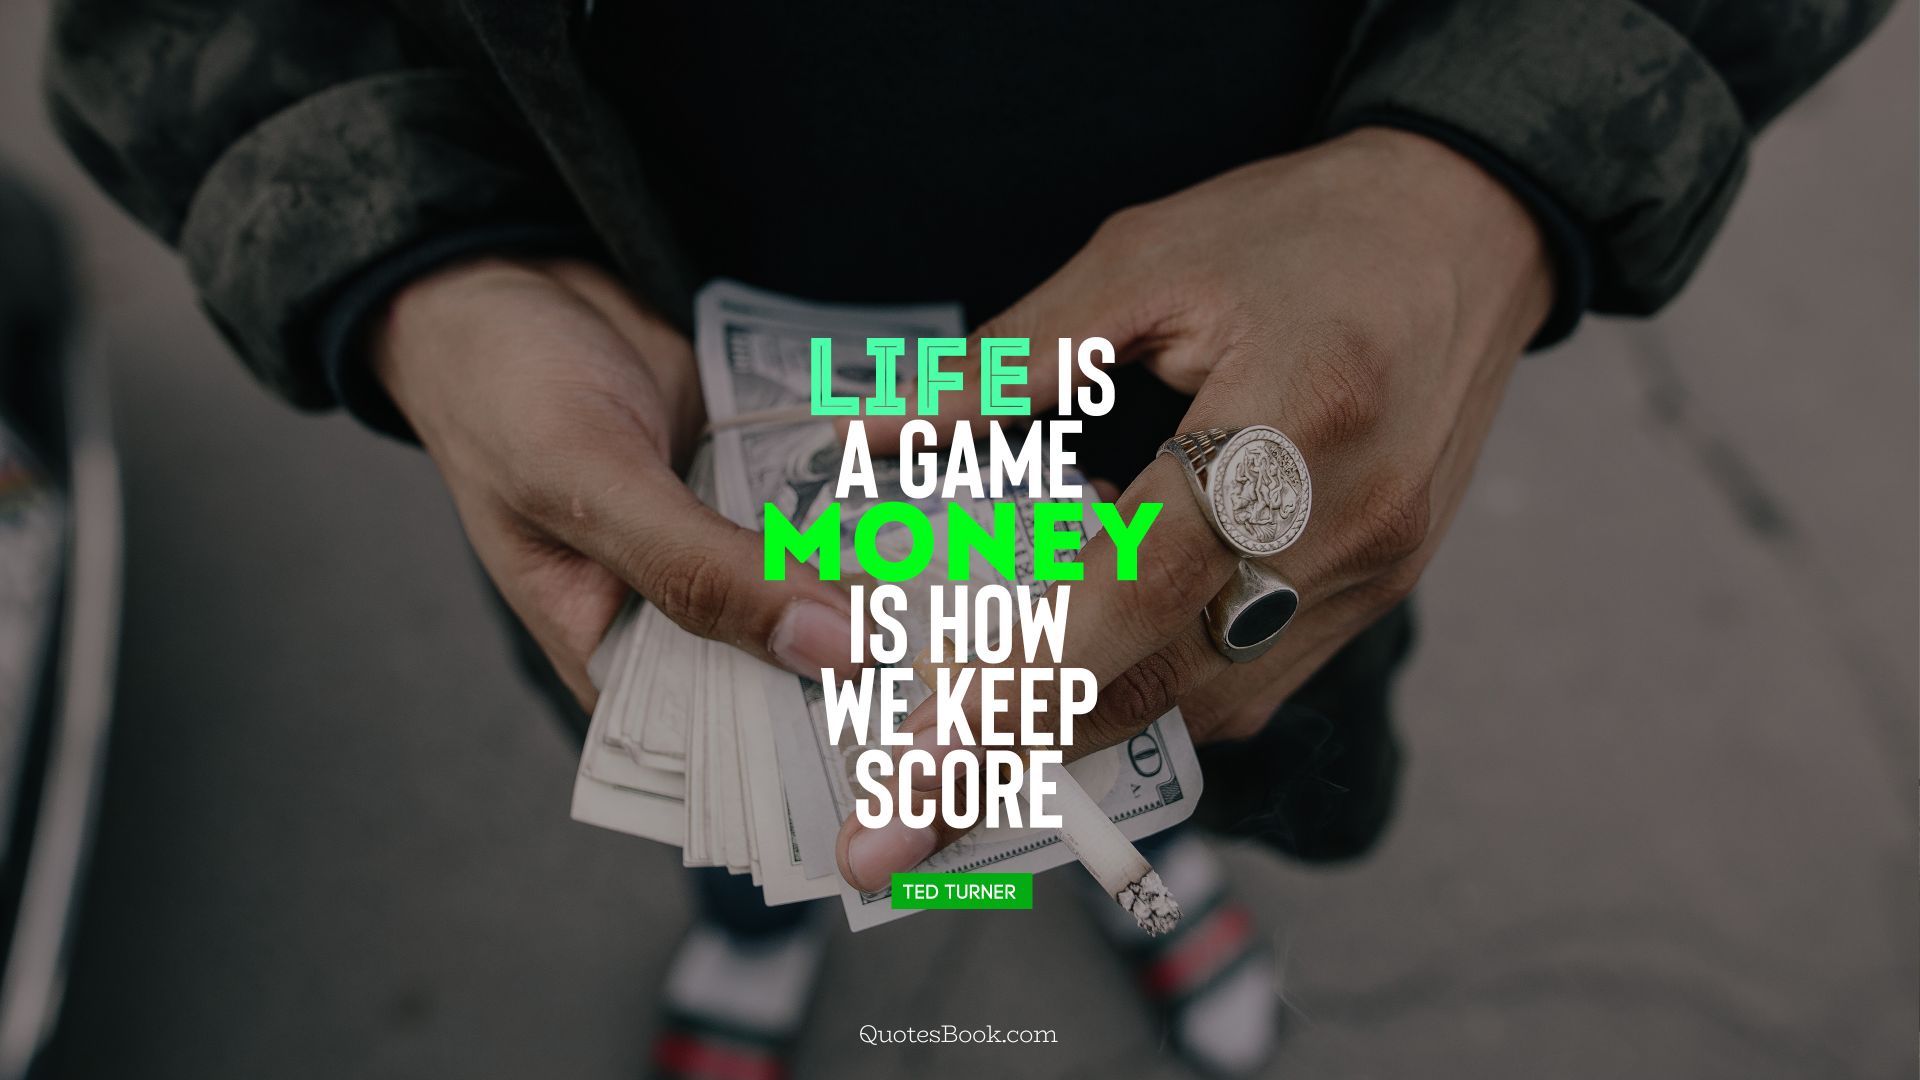 Life is a game, money is how we keep score. - Quote by Ted Turner